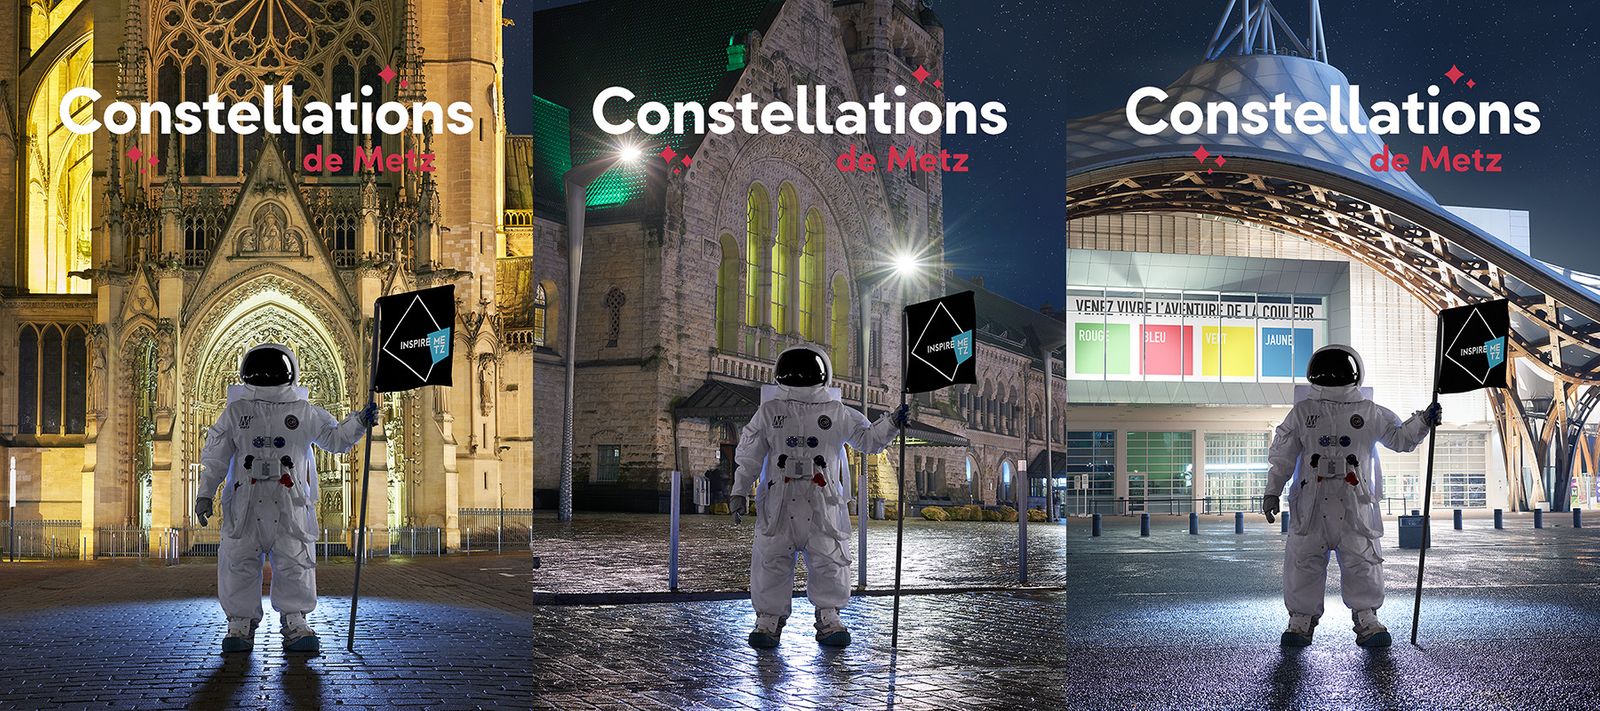 Campaign for the cultural event "Constellations de Metz"